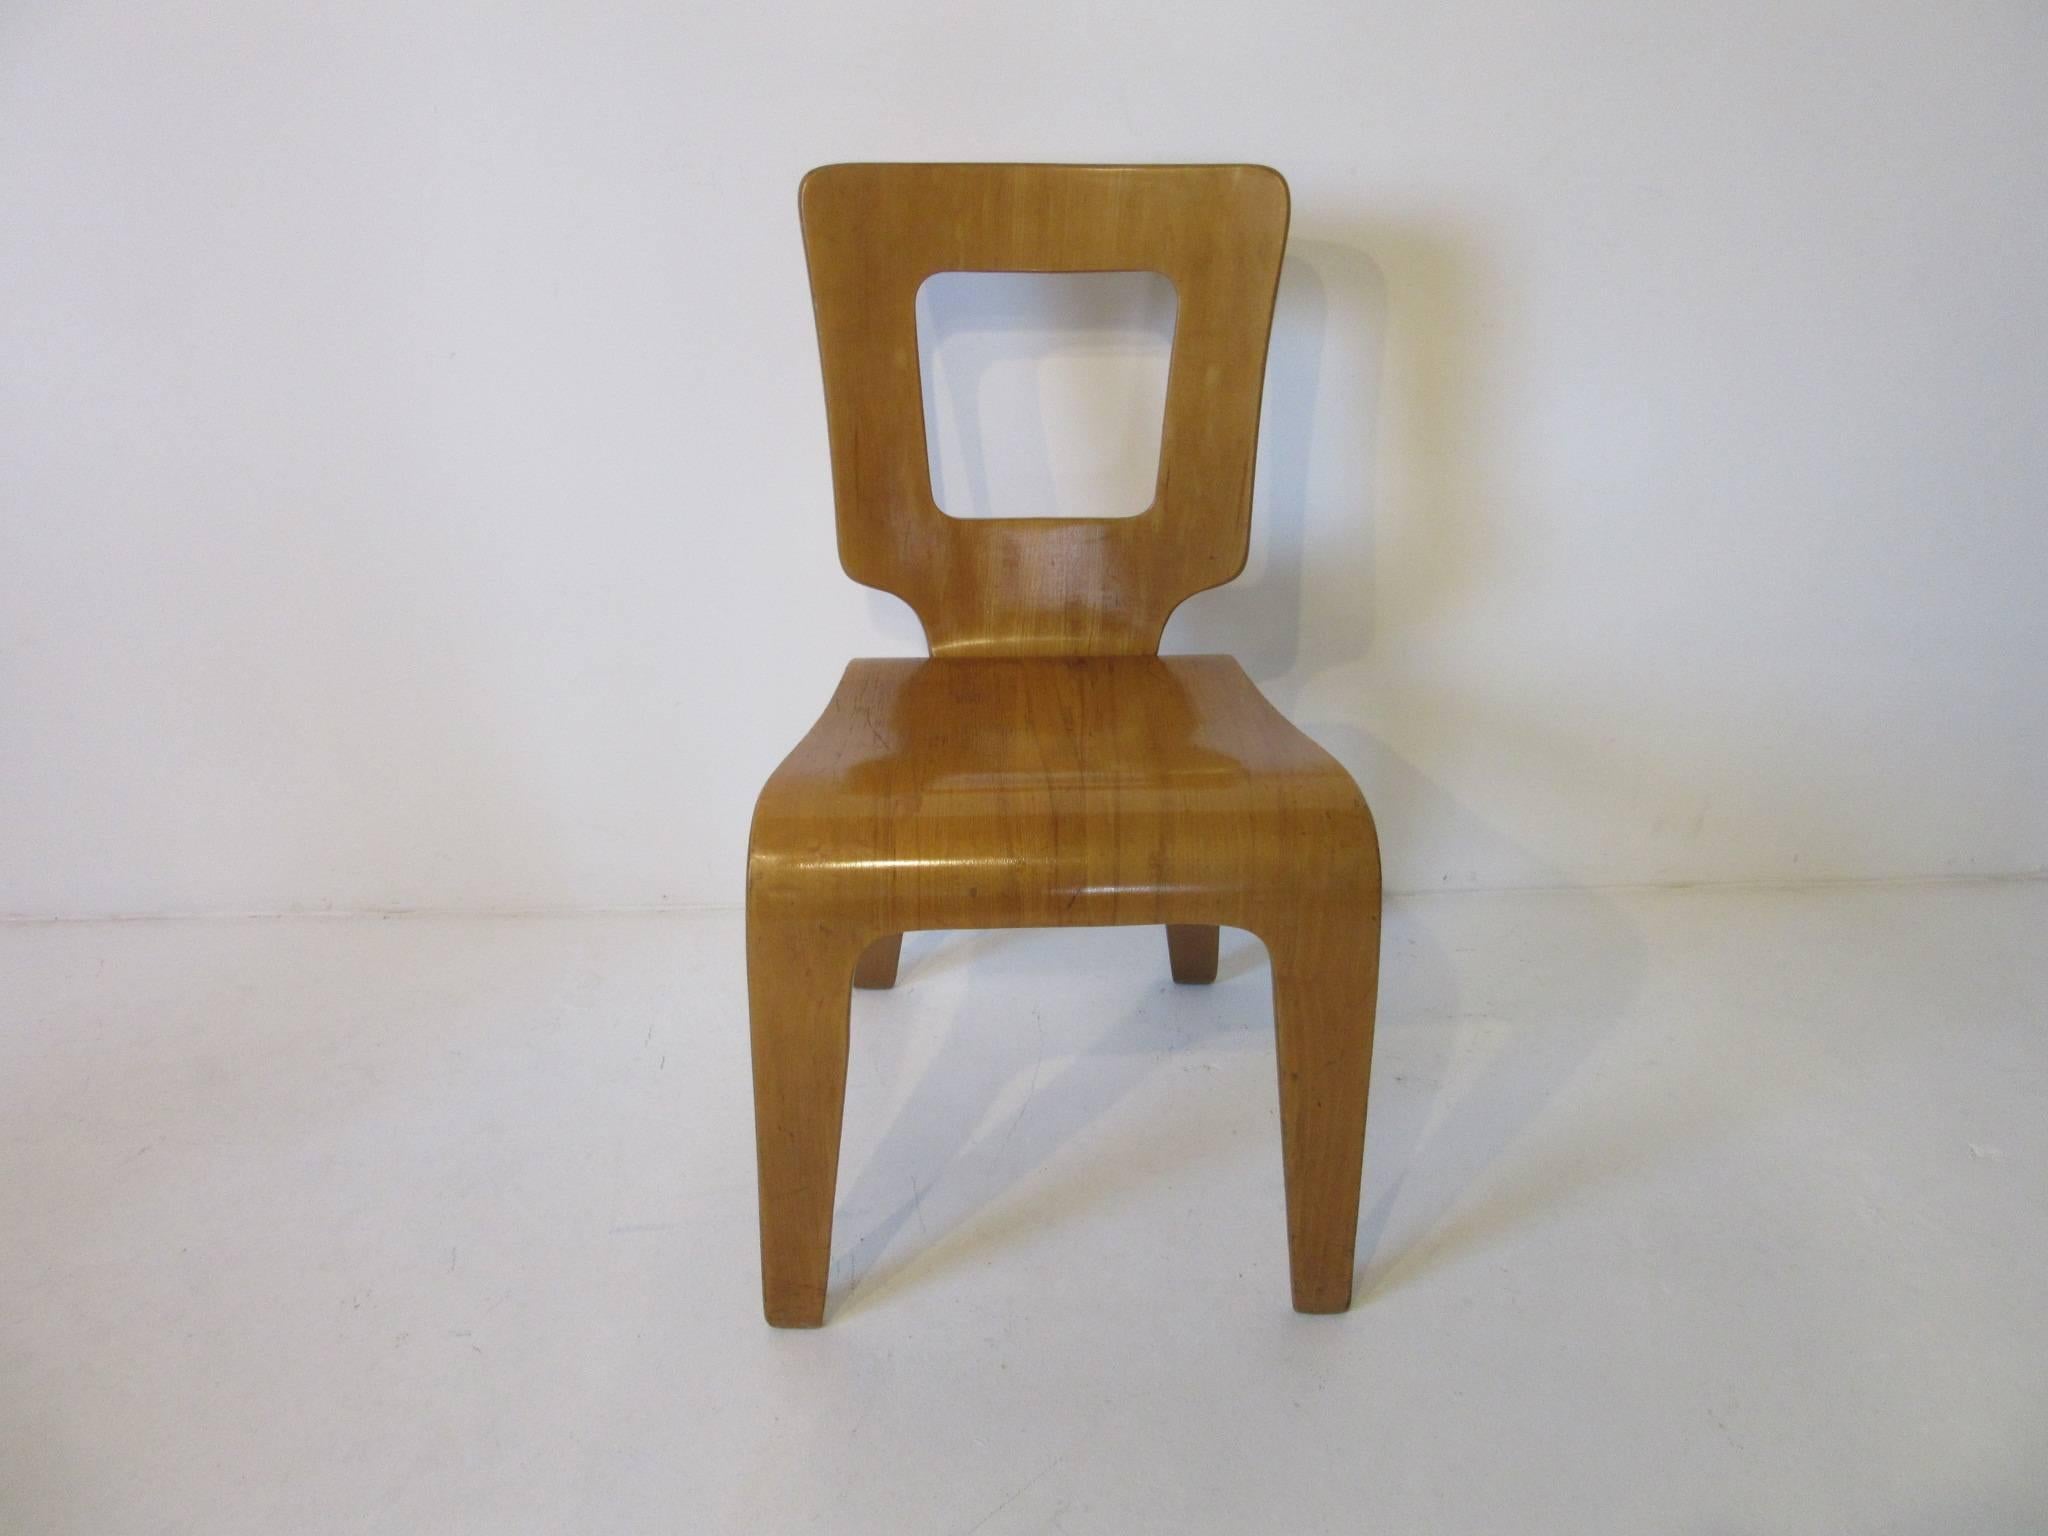 A pair of molded plywood side chairs by Herbert Von Jordan who during the period of the 1940s used building methods founded in World War II, using molded plywood in the manner of Eames and other top designers of the period. Retains the ink stamp and